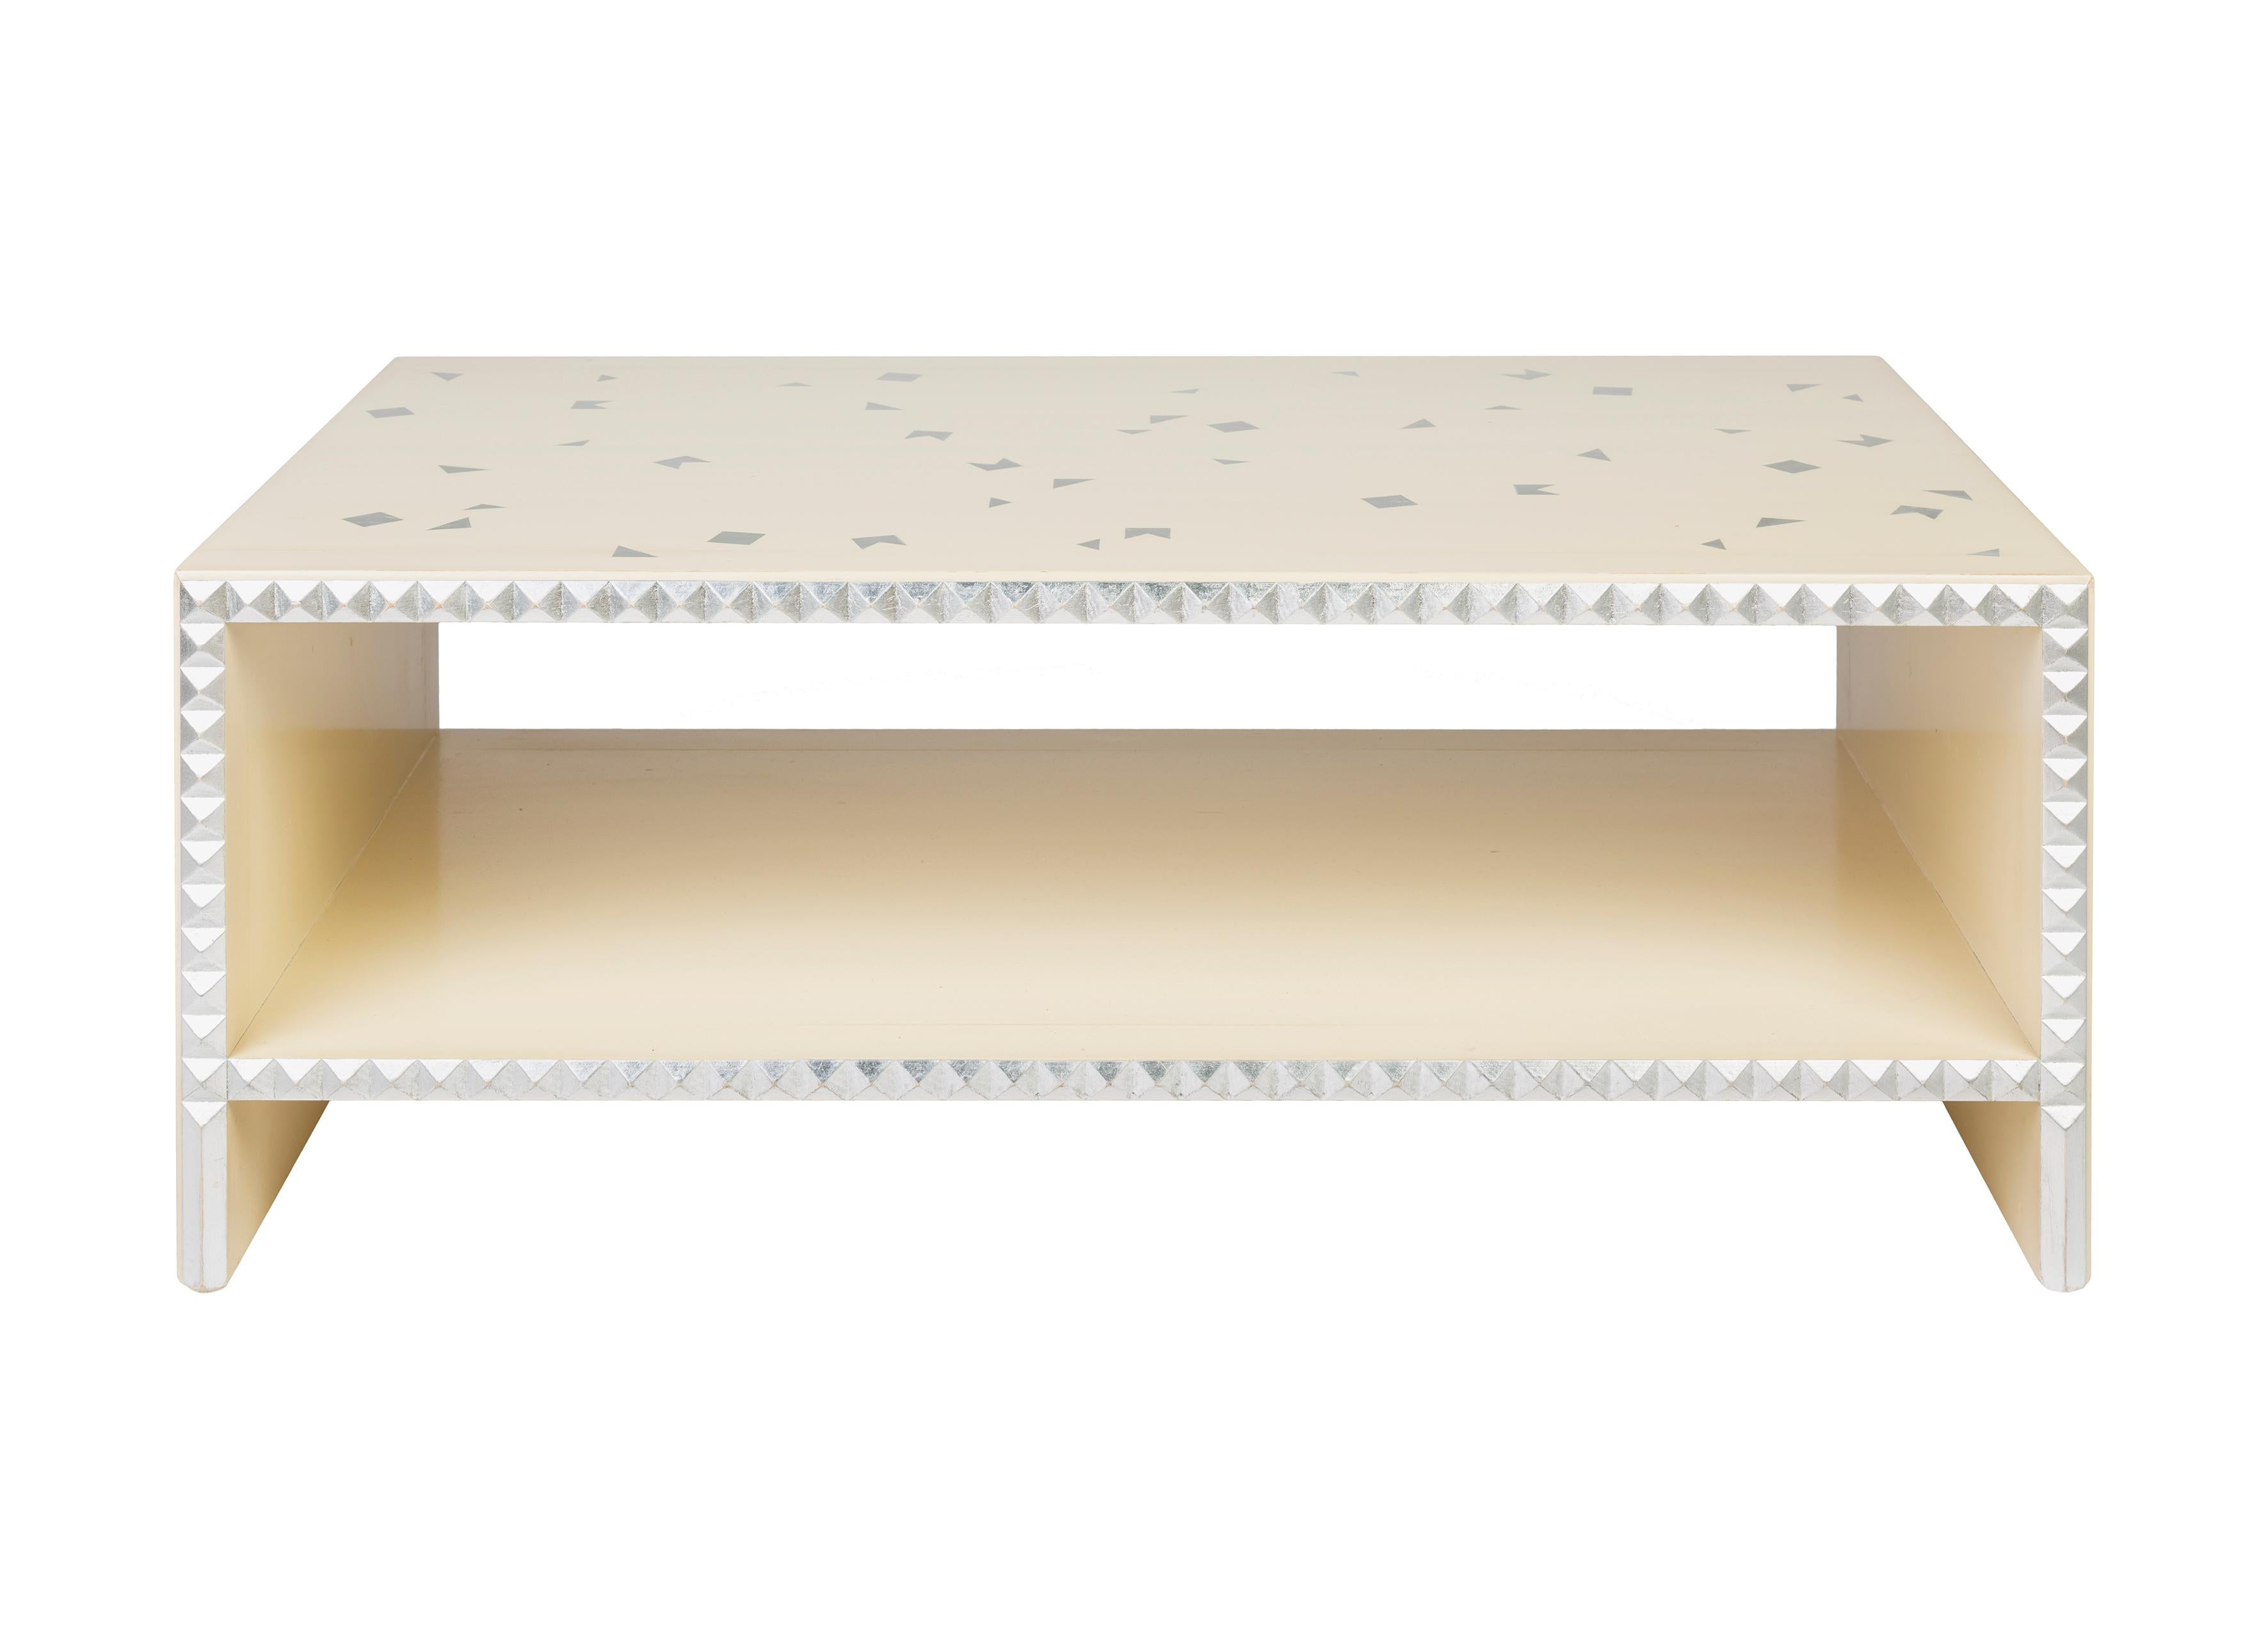 Ivoire lacquered beech coffee table. One shelf. Diamond-tipped edgings enhanced with silver highlights. Proposed with silver stencil decoration. 
It is a piece of furniture made by hand by the craftsmen of Moissonnier, a French cabinetmaker since